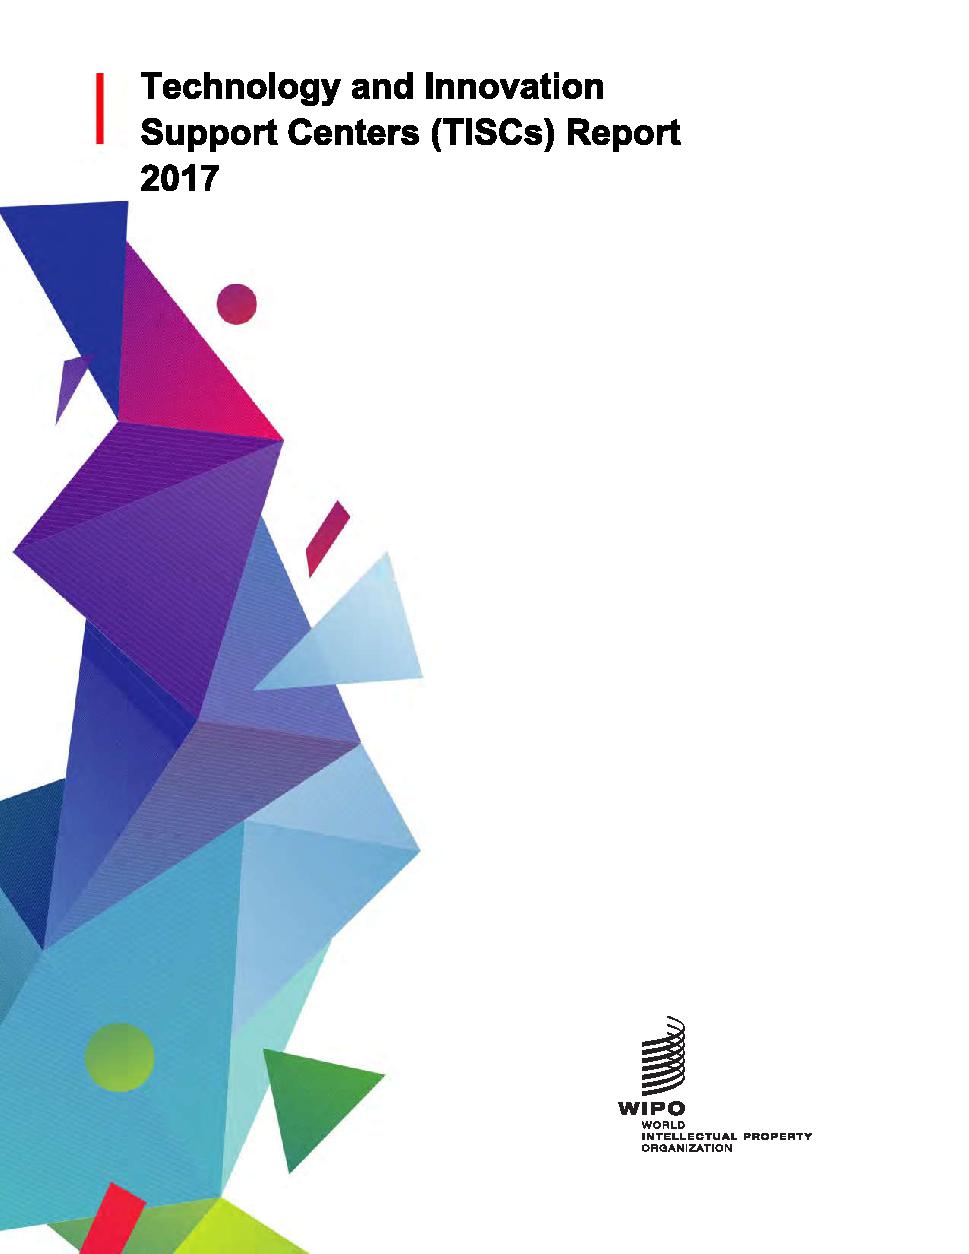 Technology and Innovation Support Centers (TISCs) Report 2017